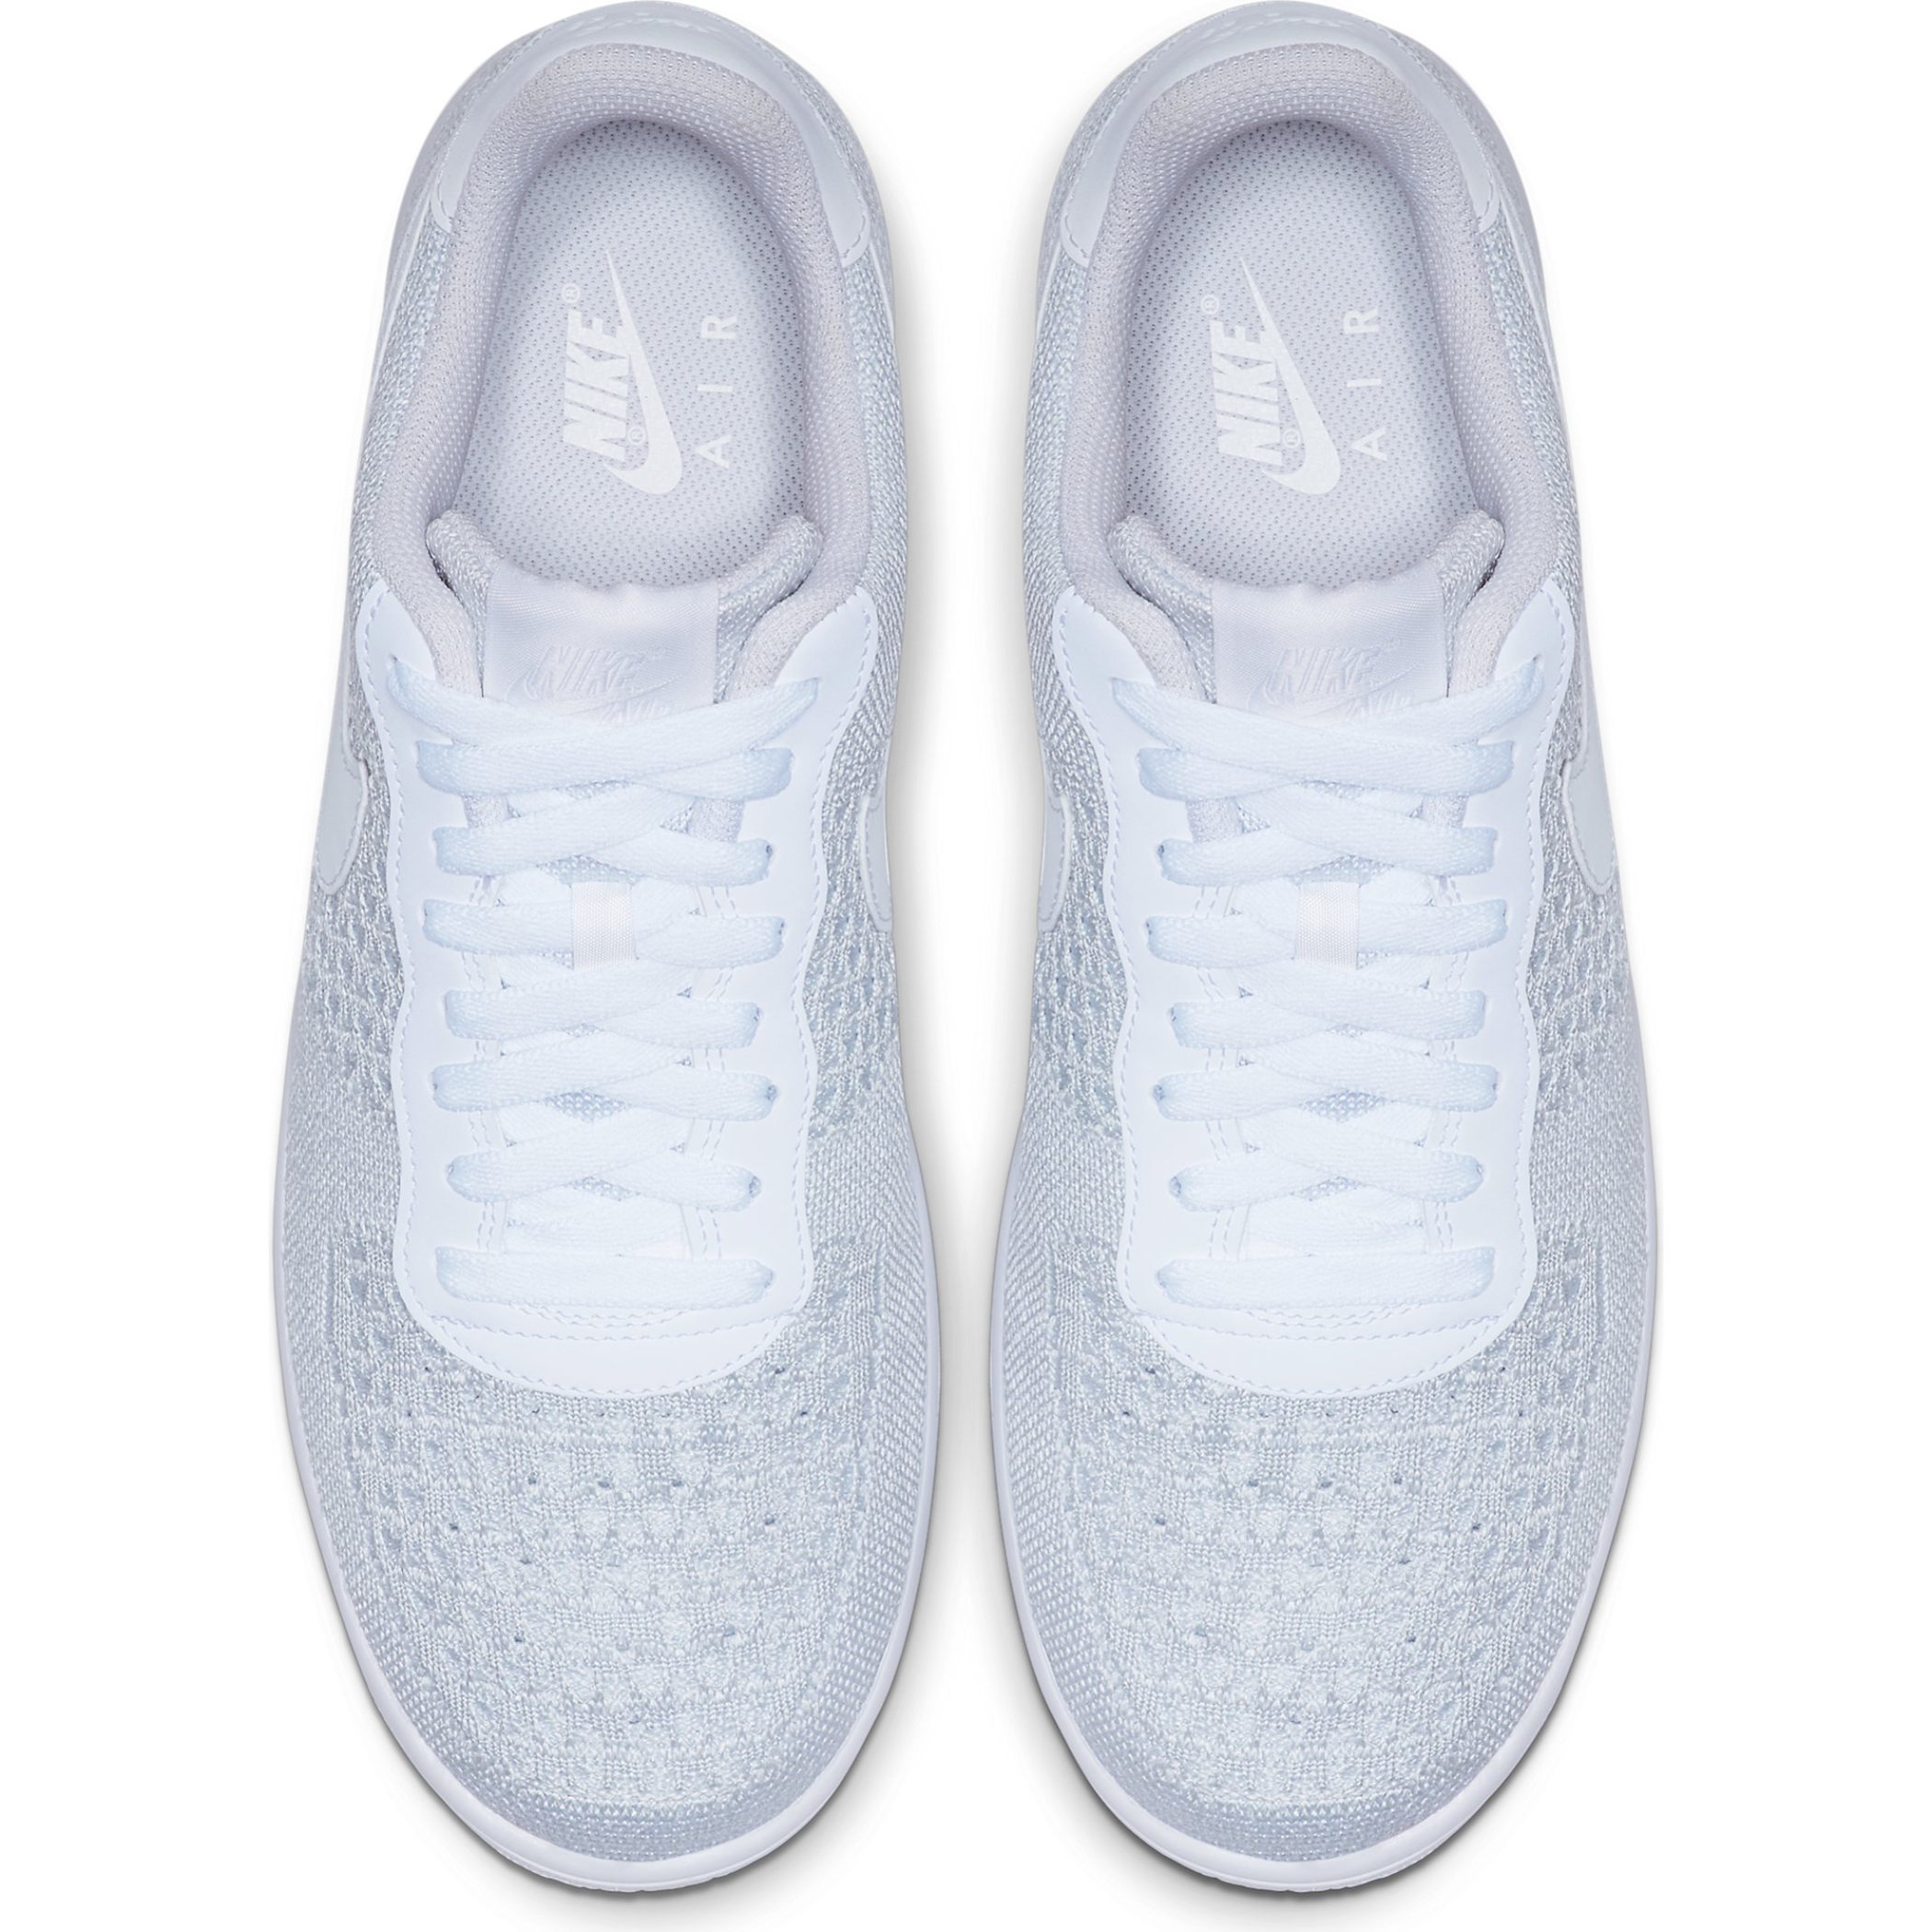 air force 1 flyknit 2.0 white